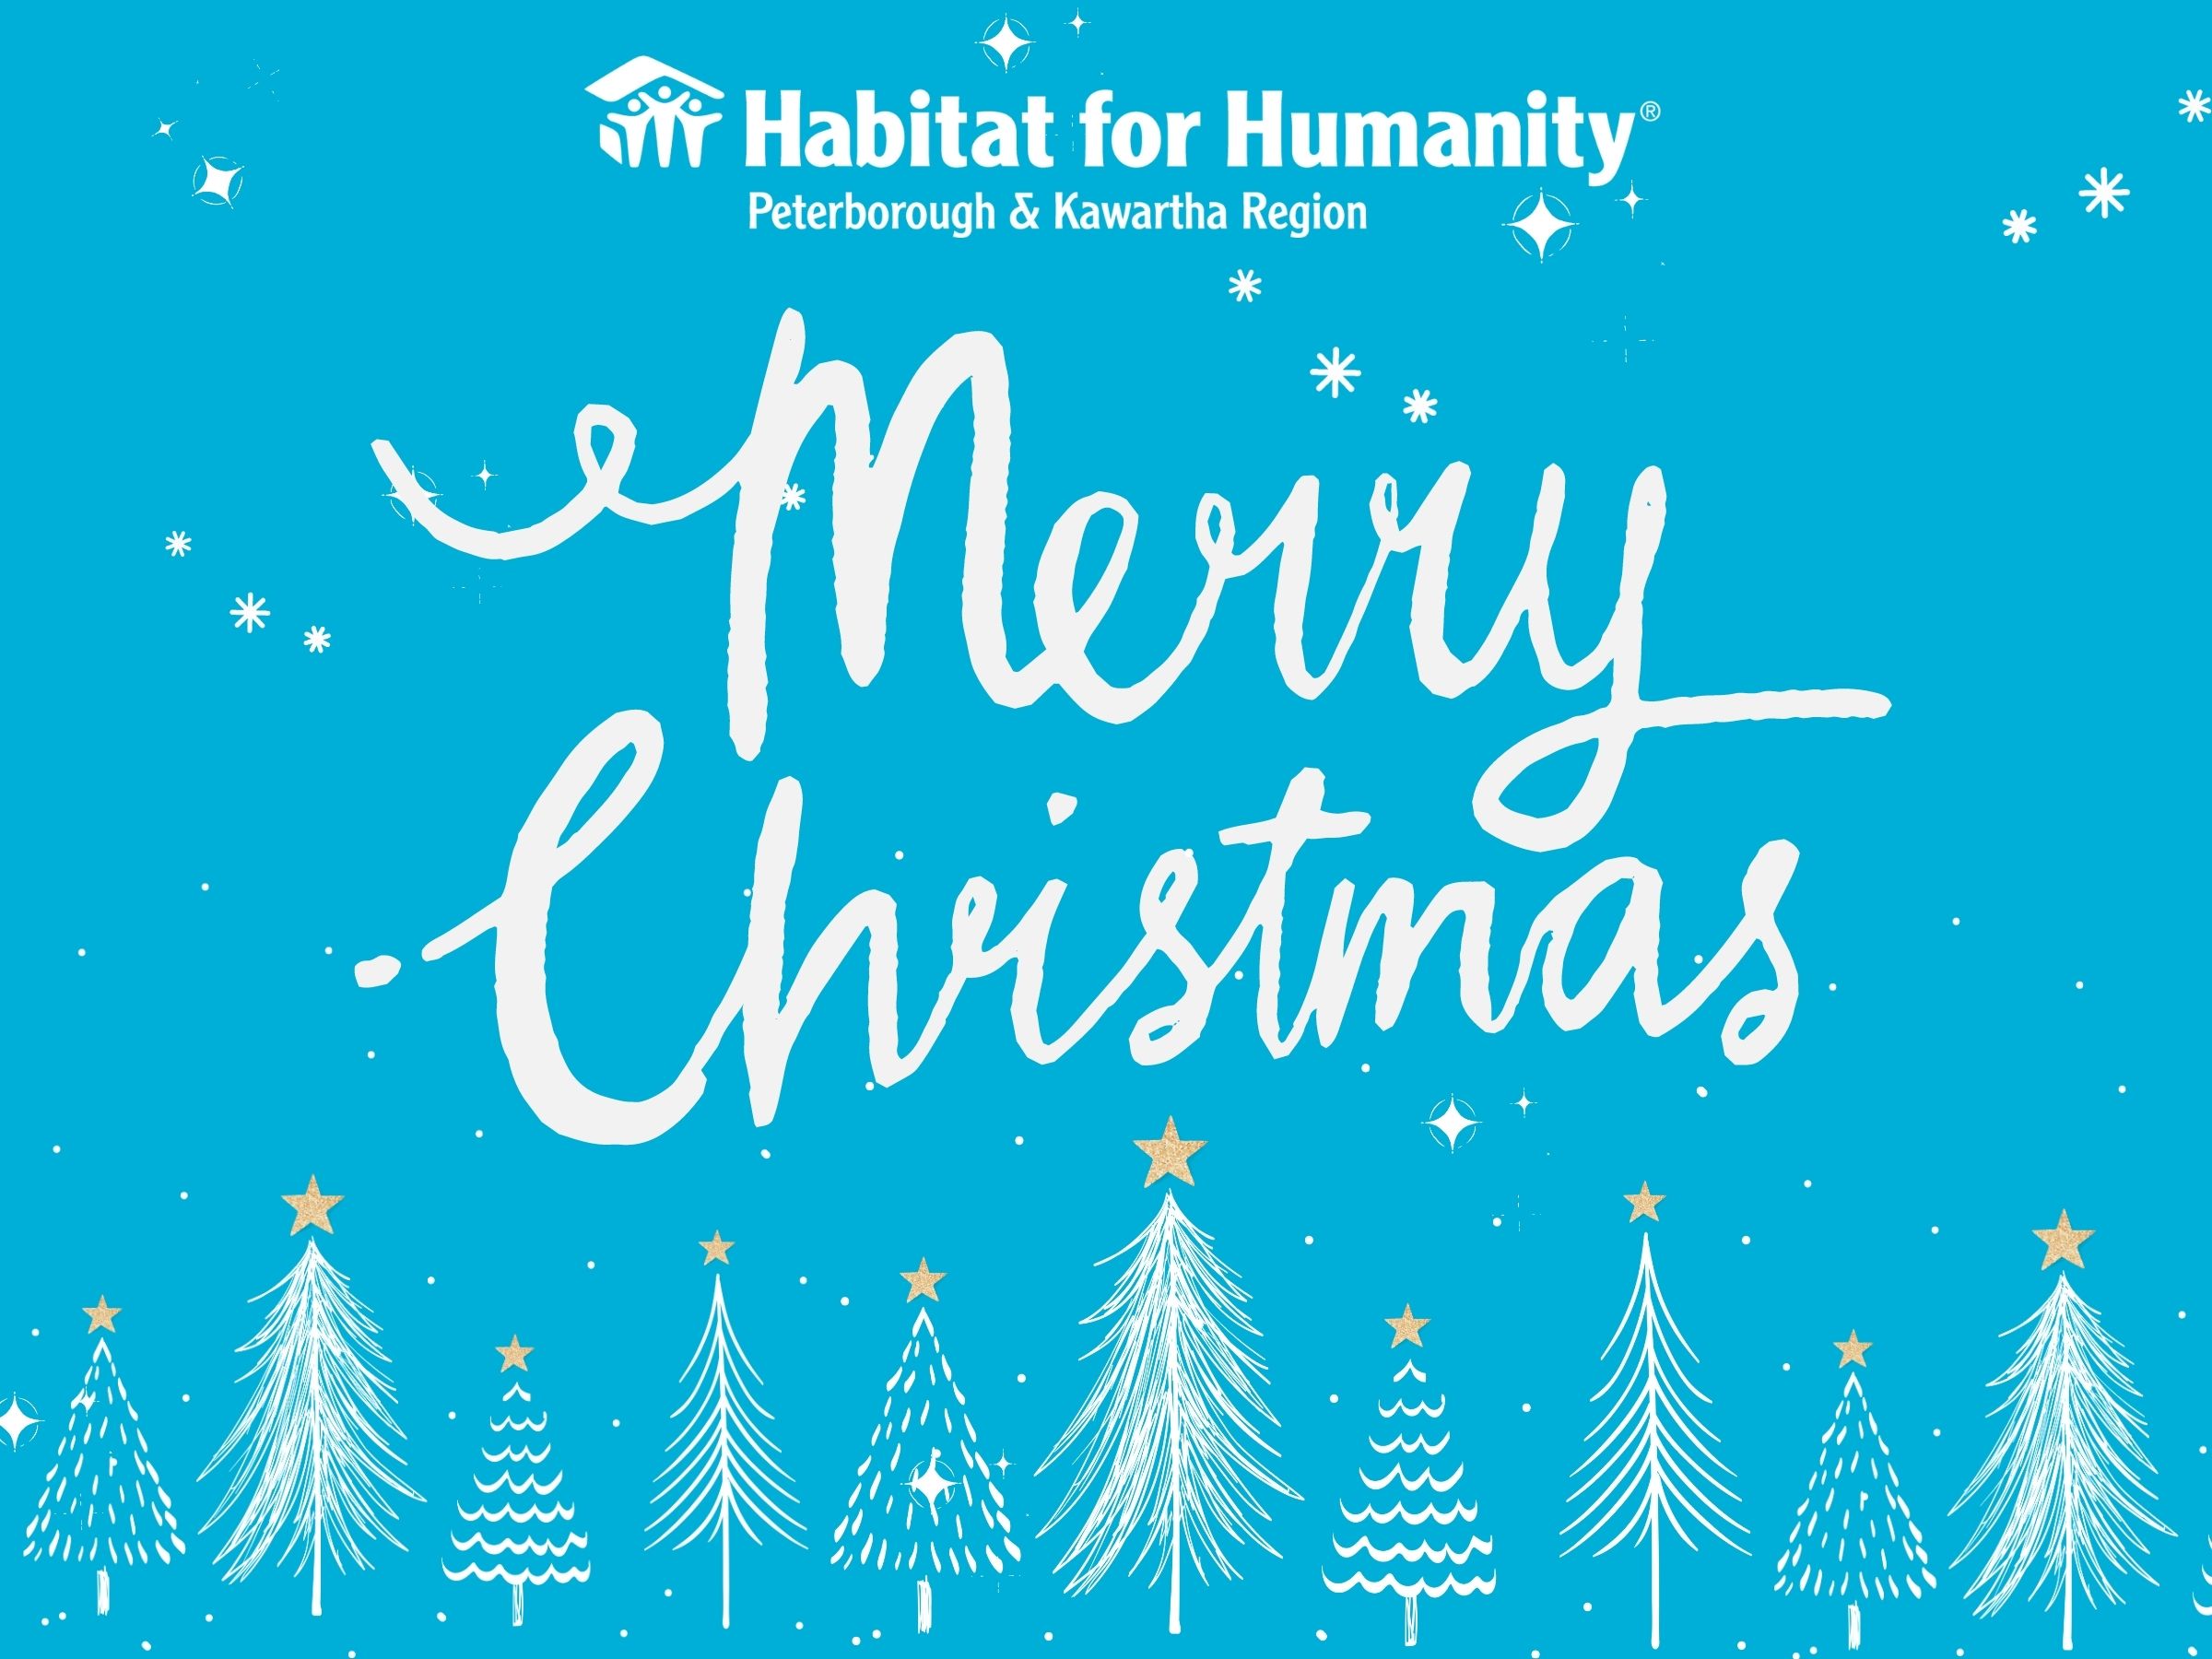 Merry Christmas from Habitat for Humanity Peterborough and Kawartha Region